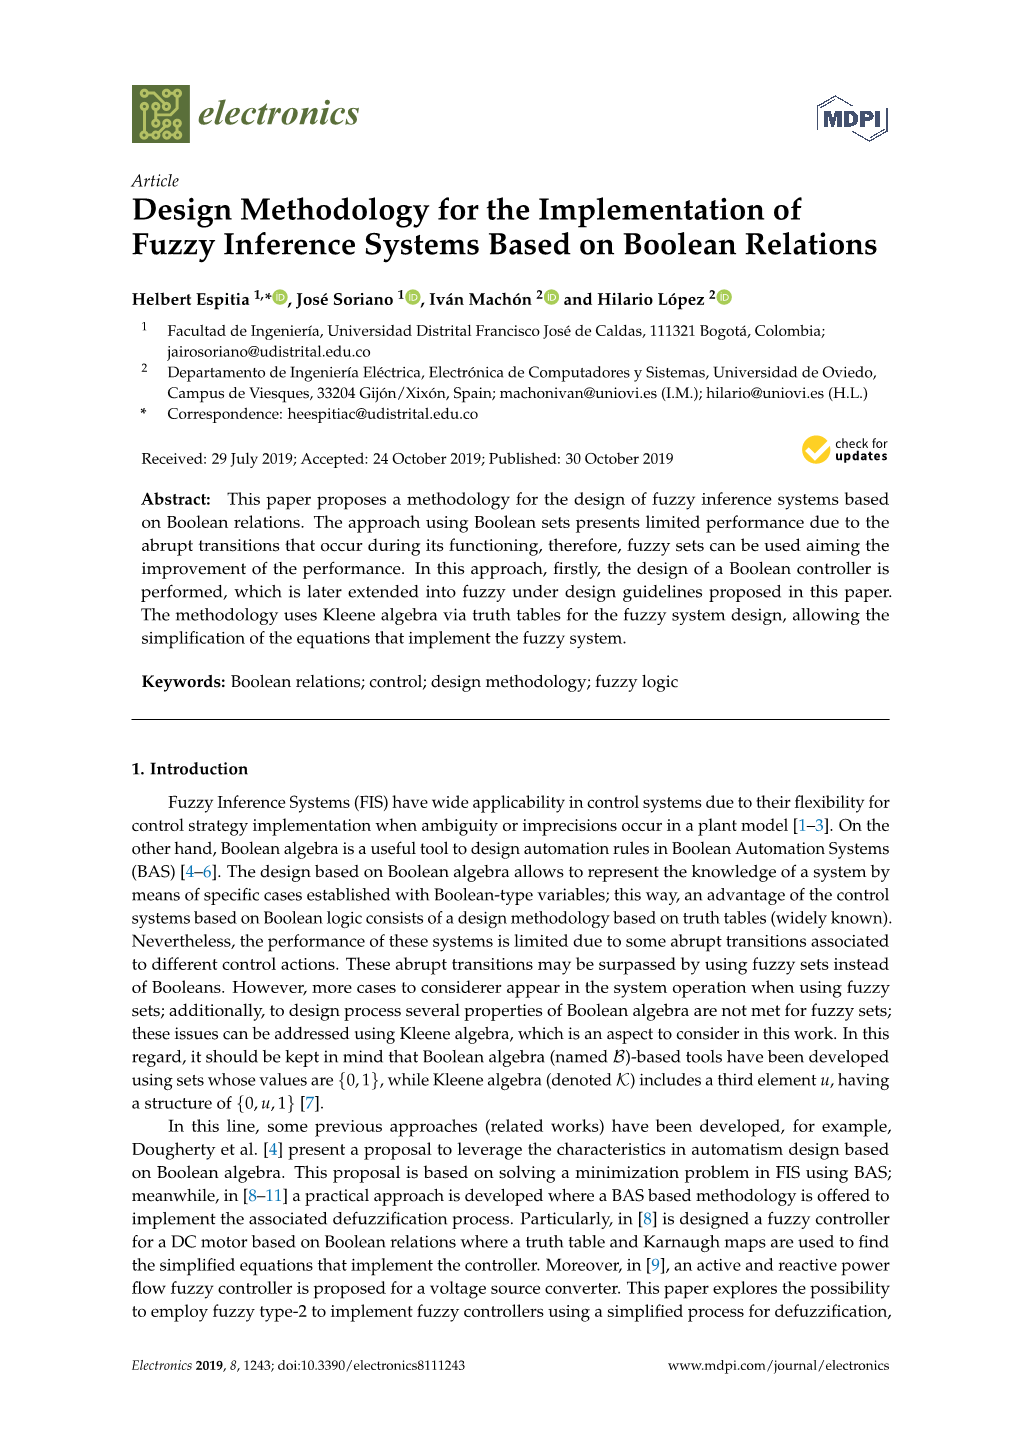 Design Methodology for the Implementation of Fuzzy Inference Systems Based on Boolean Relations